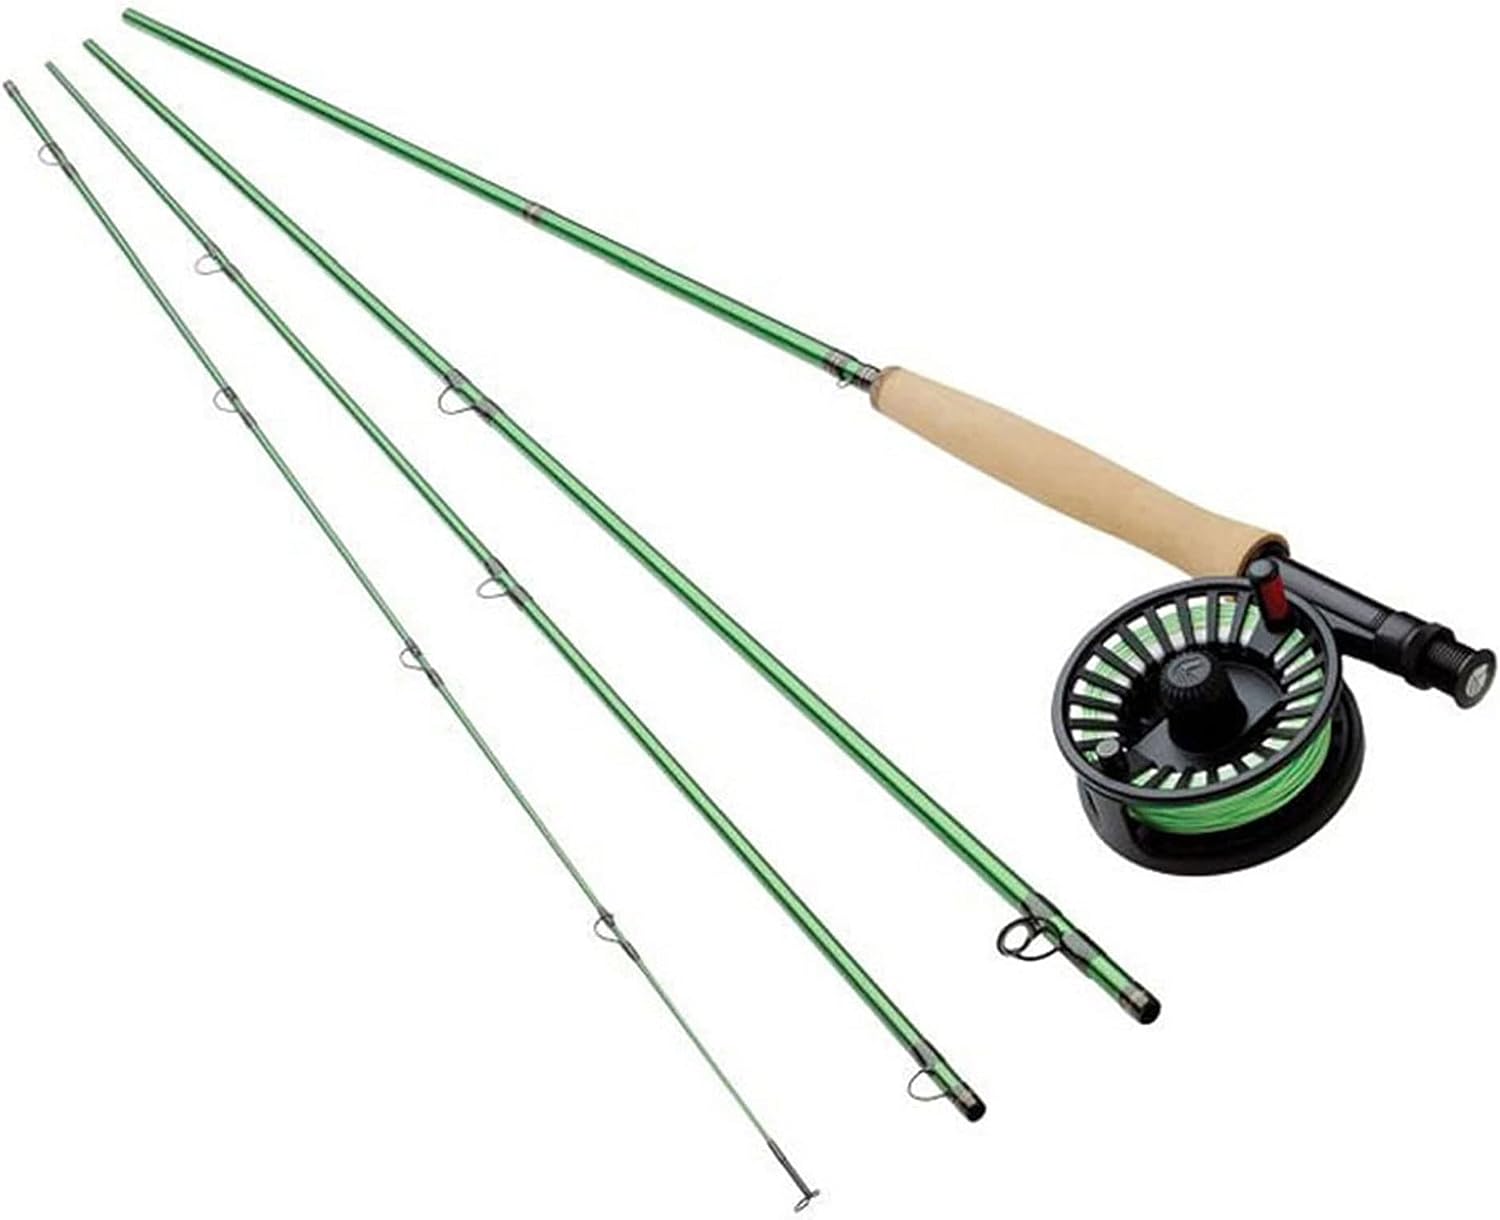 Redington VICE Fly Fishing Outfit - Fly Rod & Reel Combo - 9'0